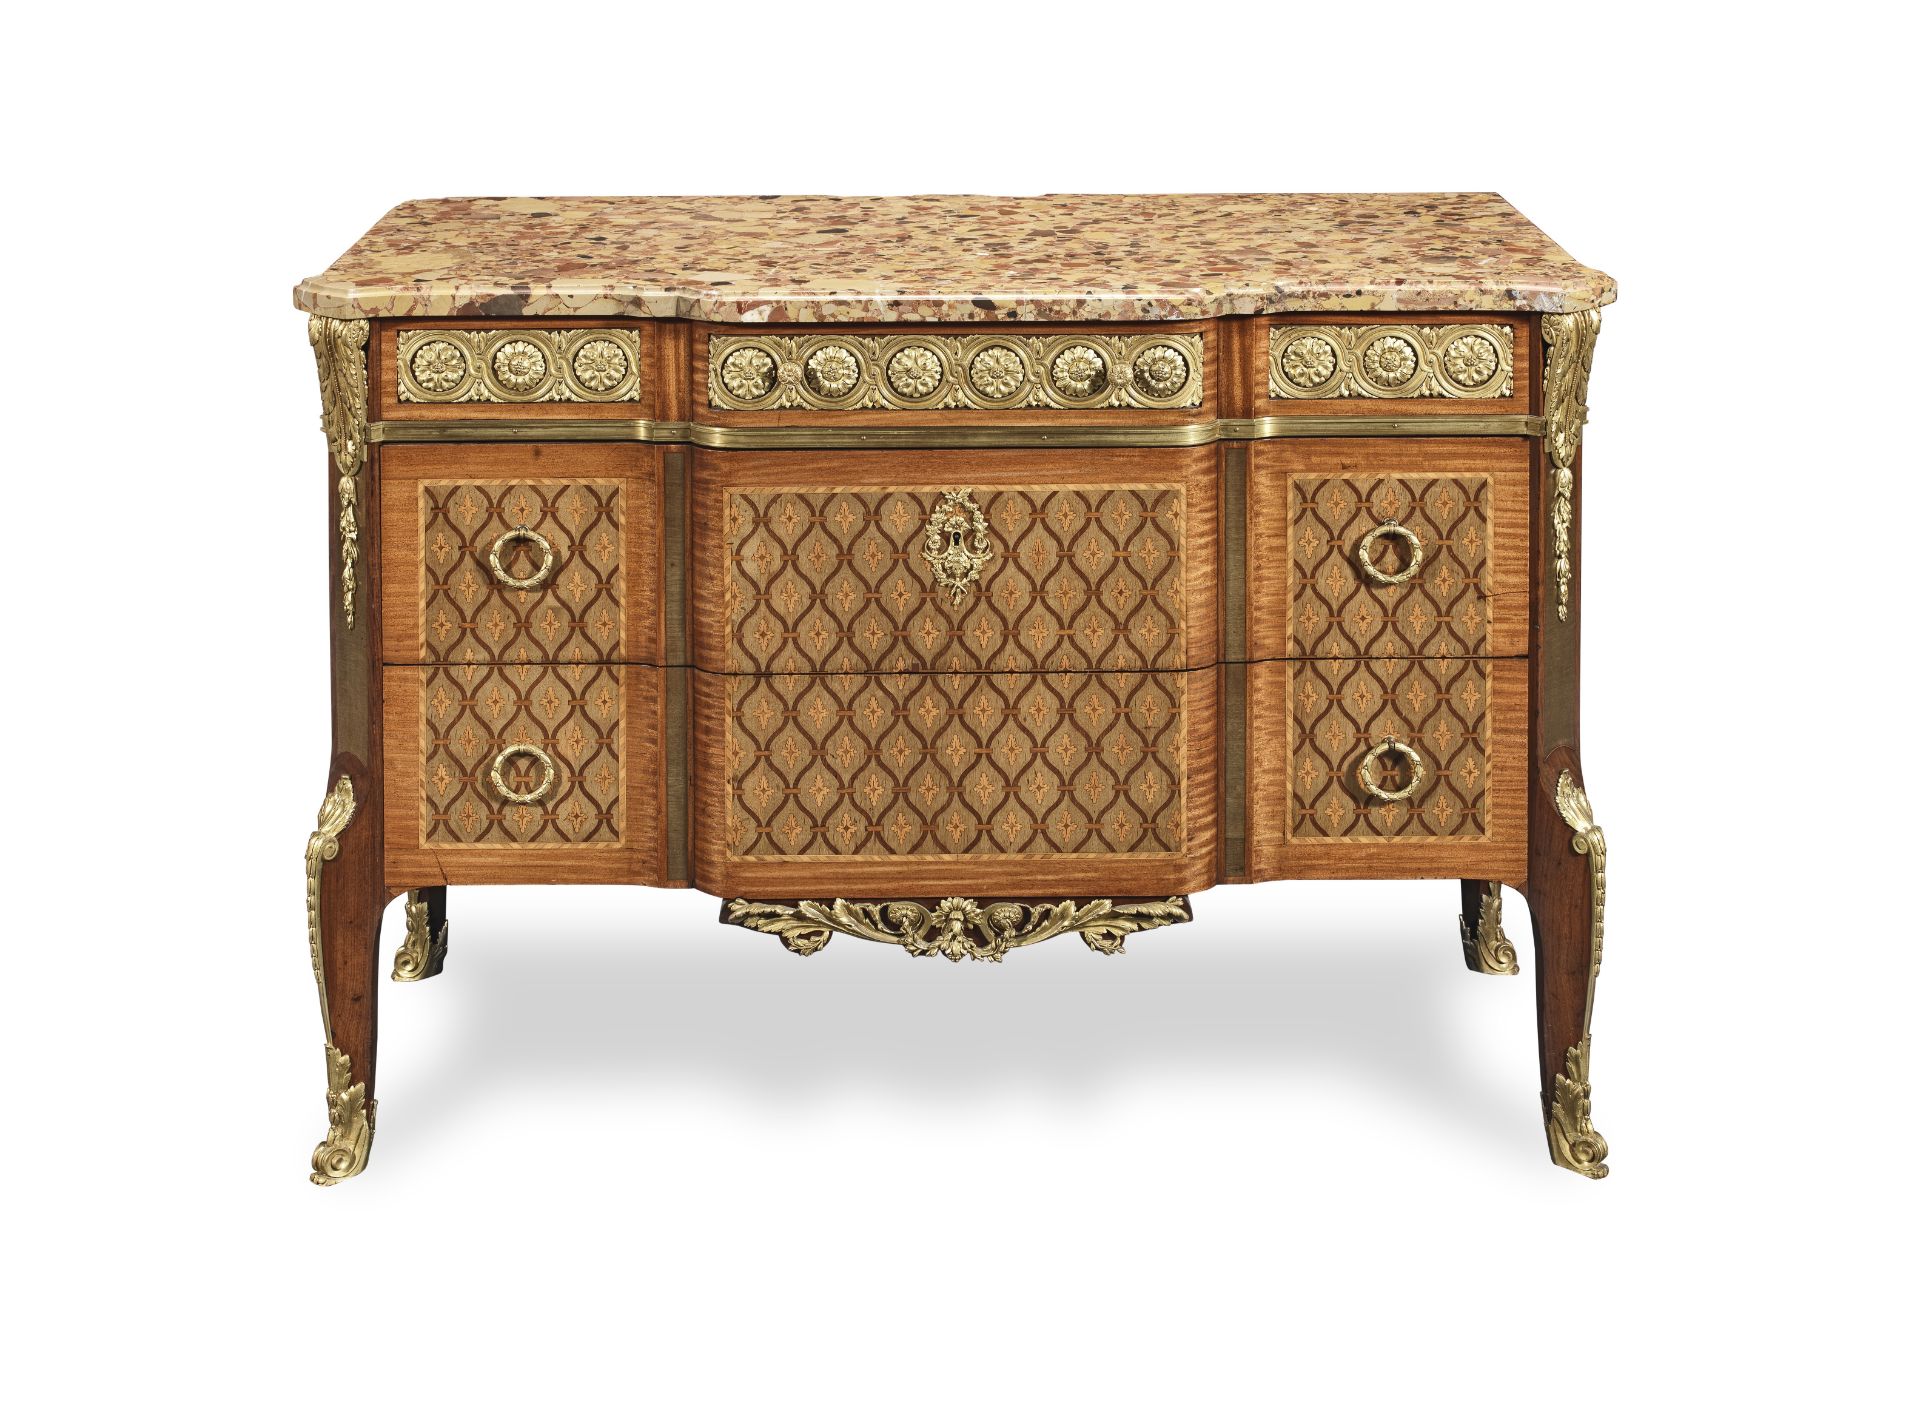 A French late 19th century ormolu mounted mahogany, bois satine, amaranth and stained sycamore ma...